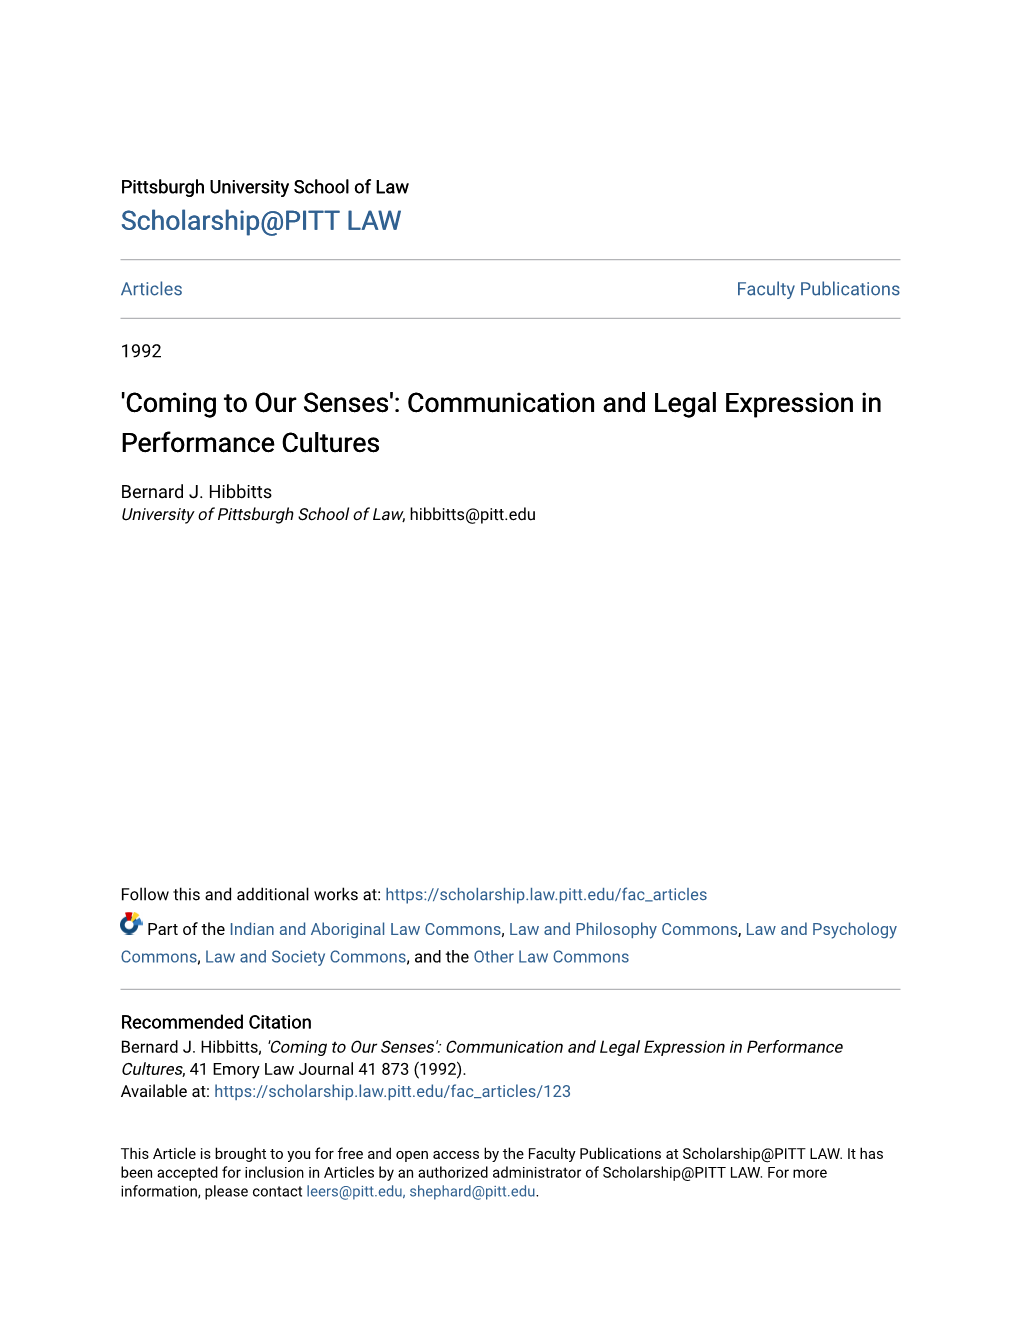 Communication and Legal Expression in Performance Cultures